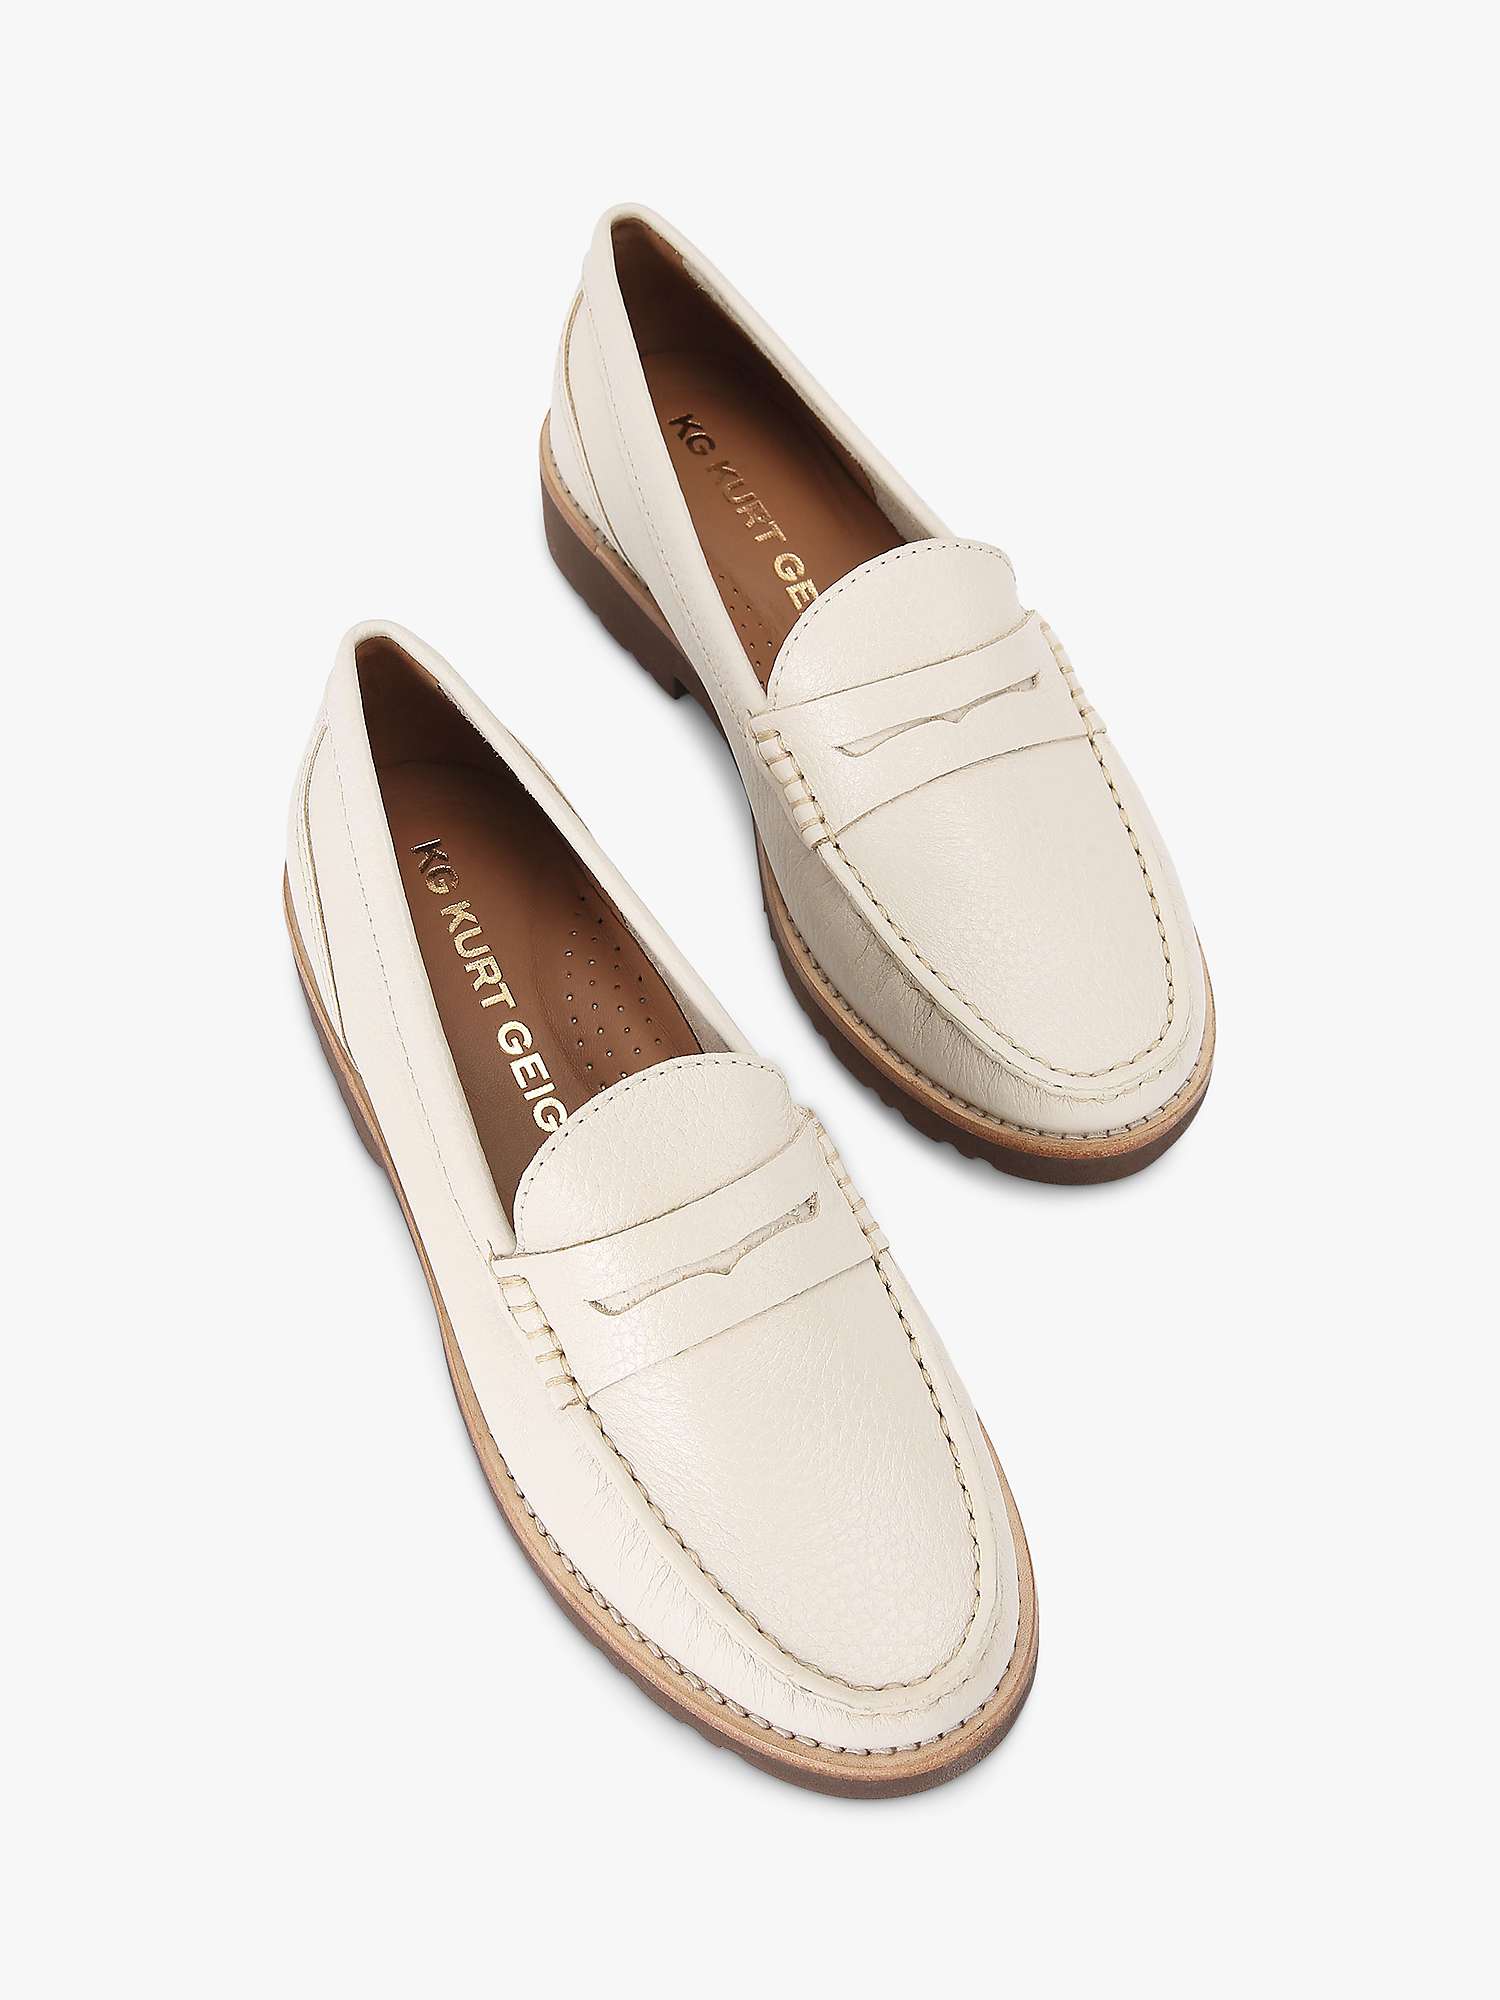 Buy KG Kurt Geiger Melody Leather Loafers, Natural Putty Online at johnlewis.com